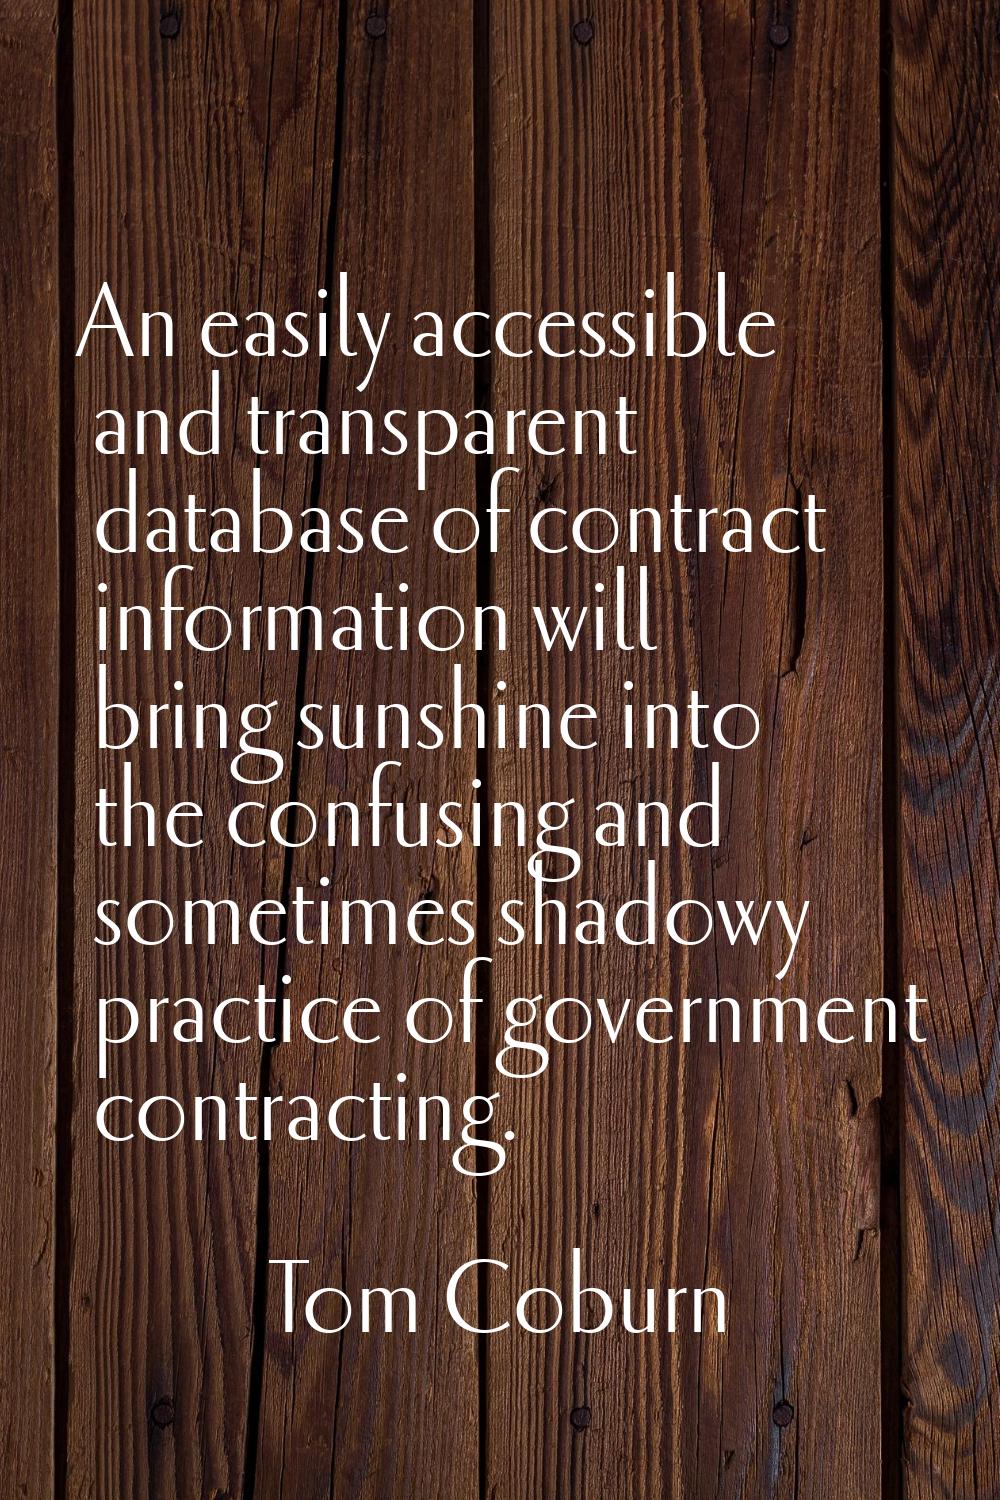 An easily accessible and transparent database of contract information will bring sunshine into the 